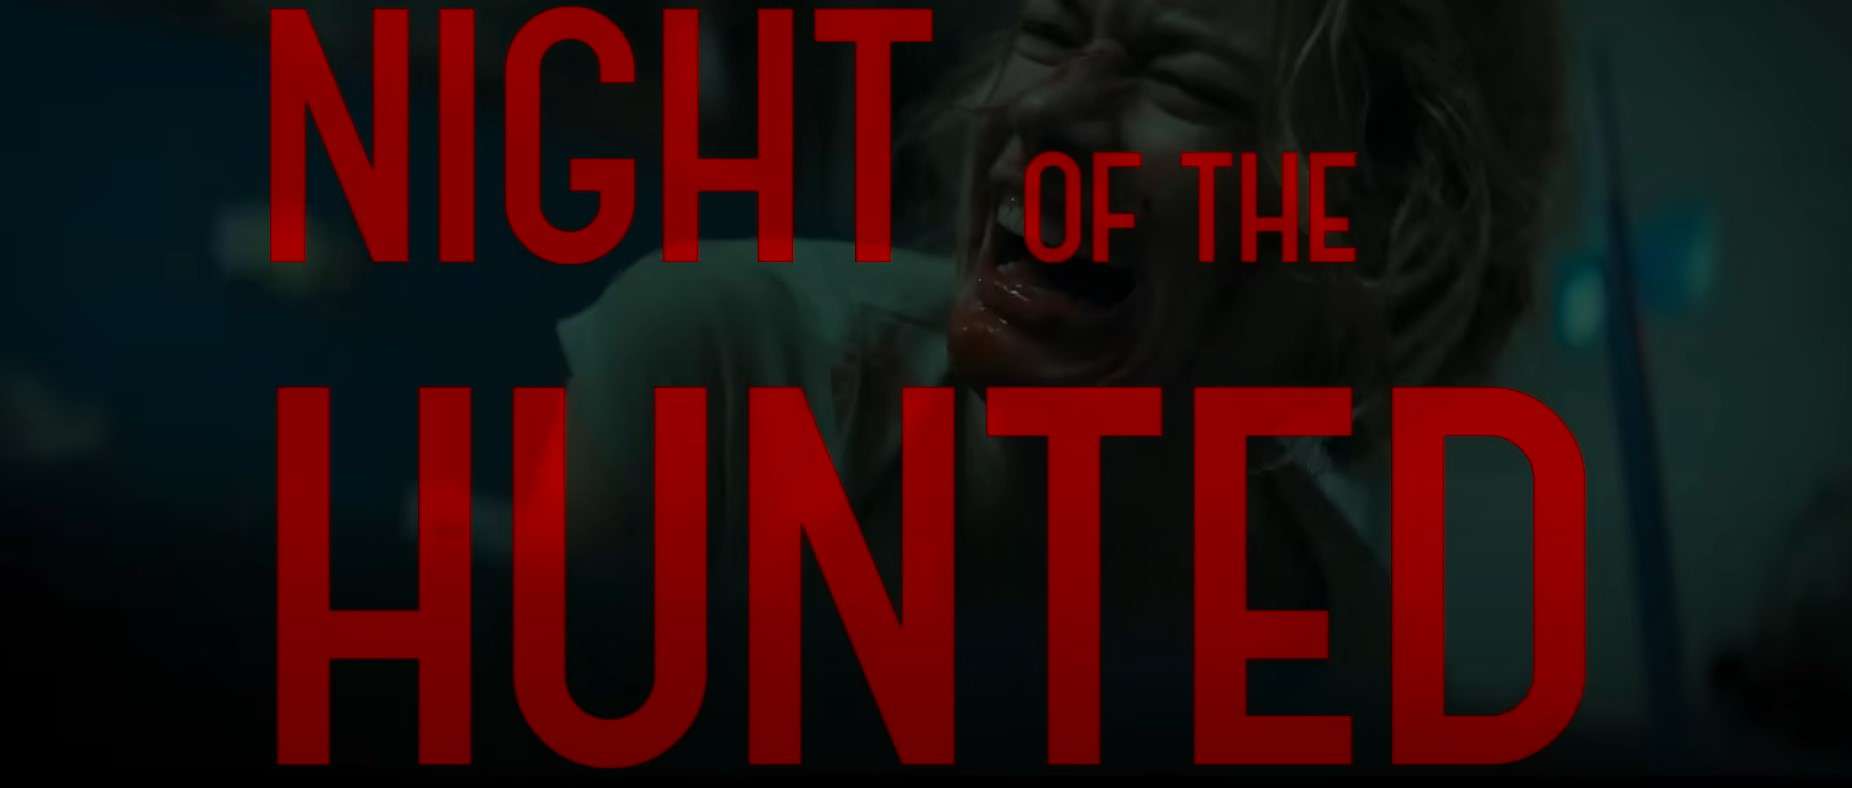 The Night Of The Hunted Movie Ending Explained